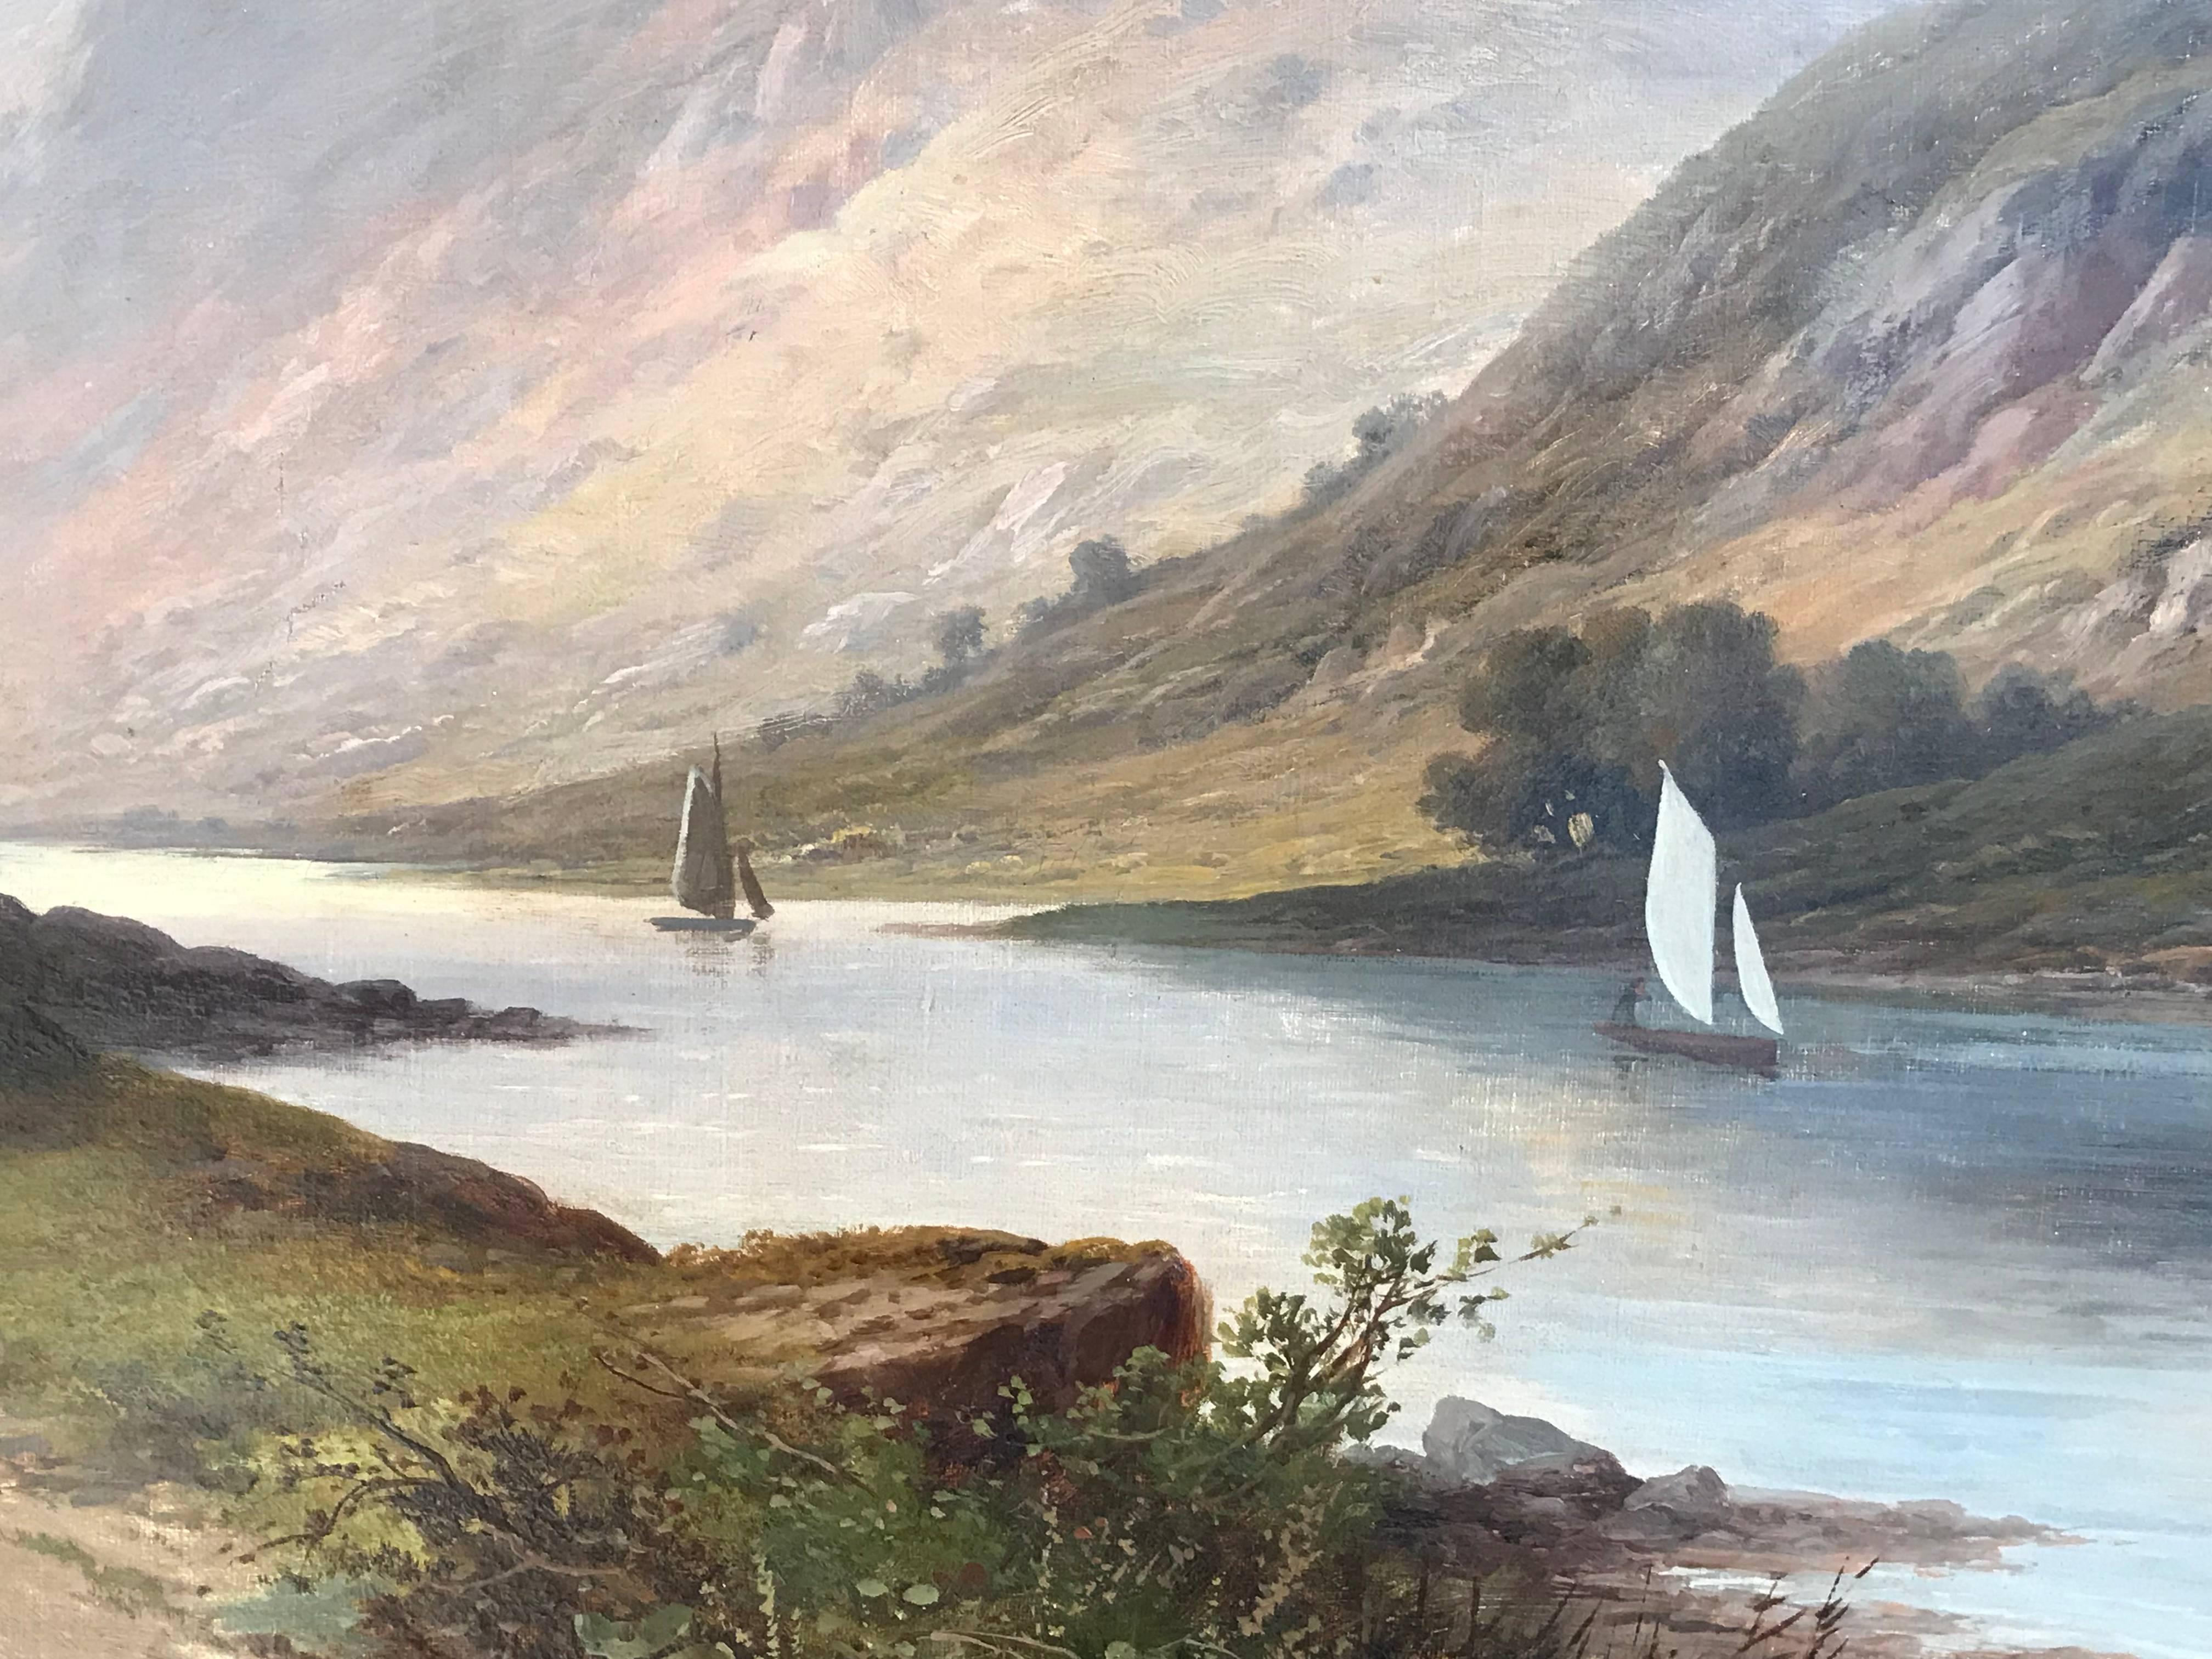 Loch Goil
by Victor Rolyat, British late 19th century
oil painting on canvas, framed
signed lower corner, titled verso

canvas: 19 x 29 inches
framed: 26 x 36 inches

provenance: 
private collection, England

Very fine original Victorian oil